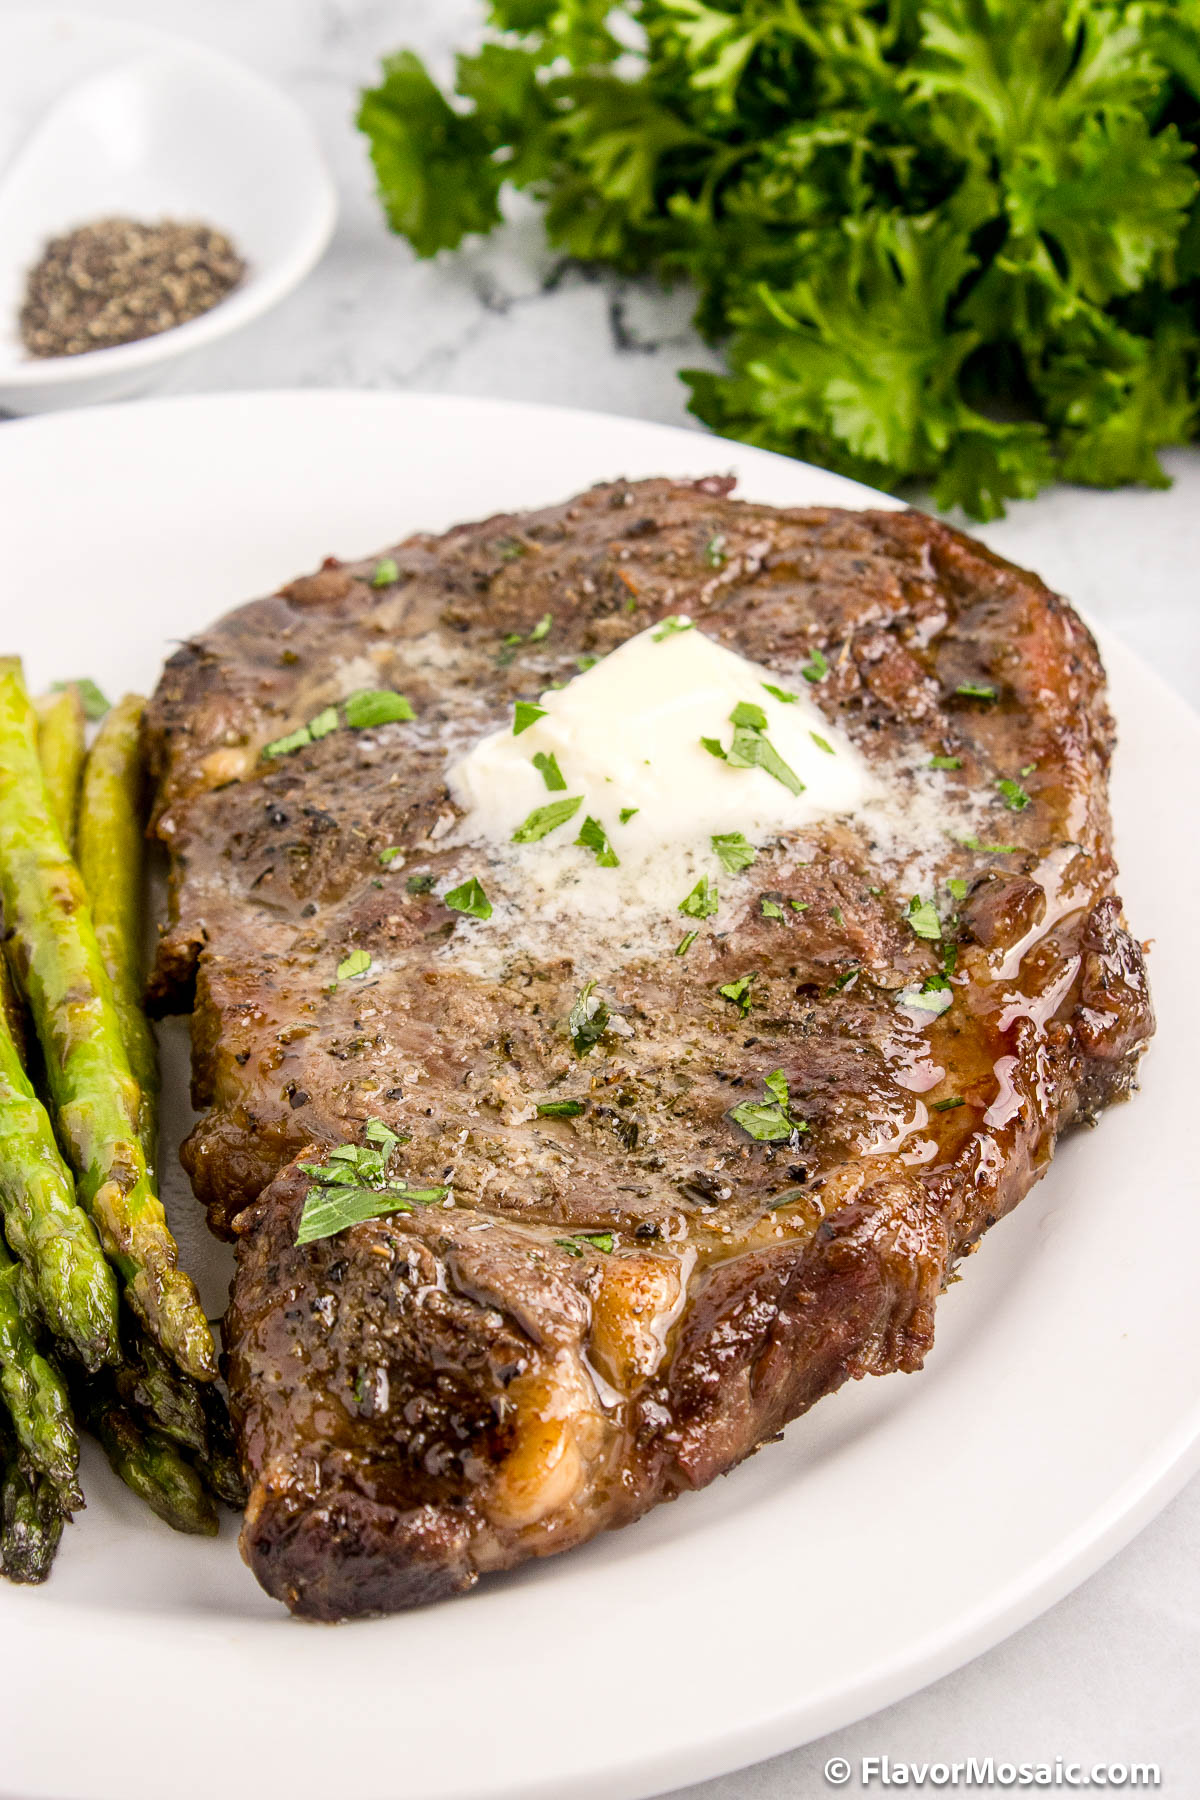 A big juicy steak (ribeye steak) with partially melted butter and chopped fresh parsley on top, sitting on a white dinner plate next to asparagus.